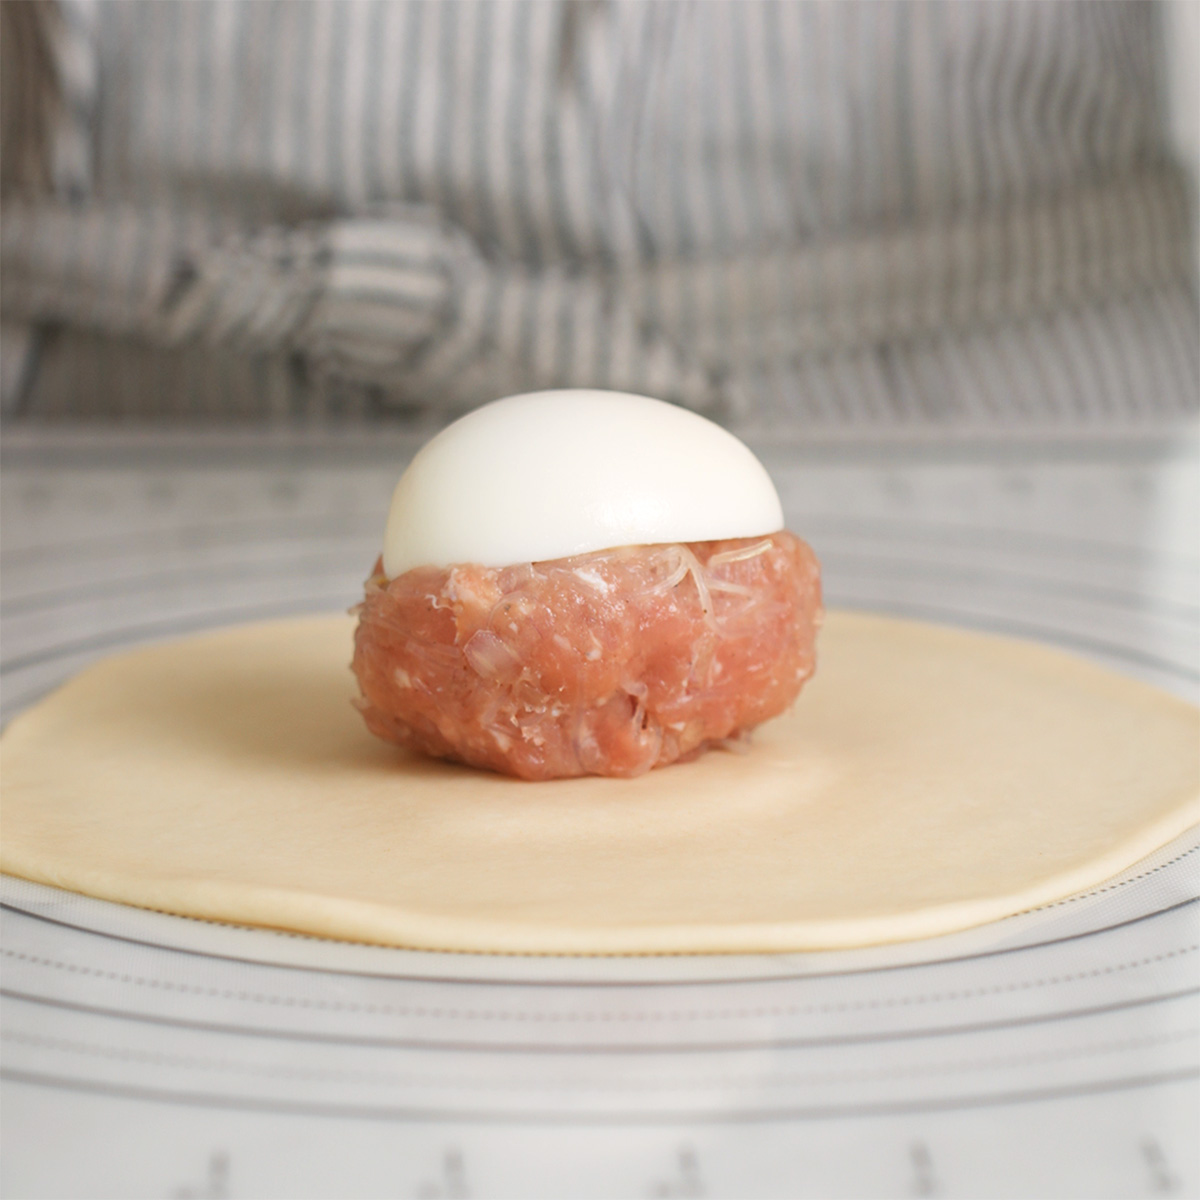 A meatball and egg sitting on a rolled out disc of dough.